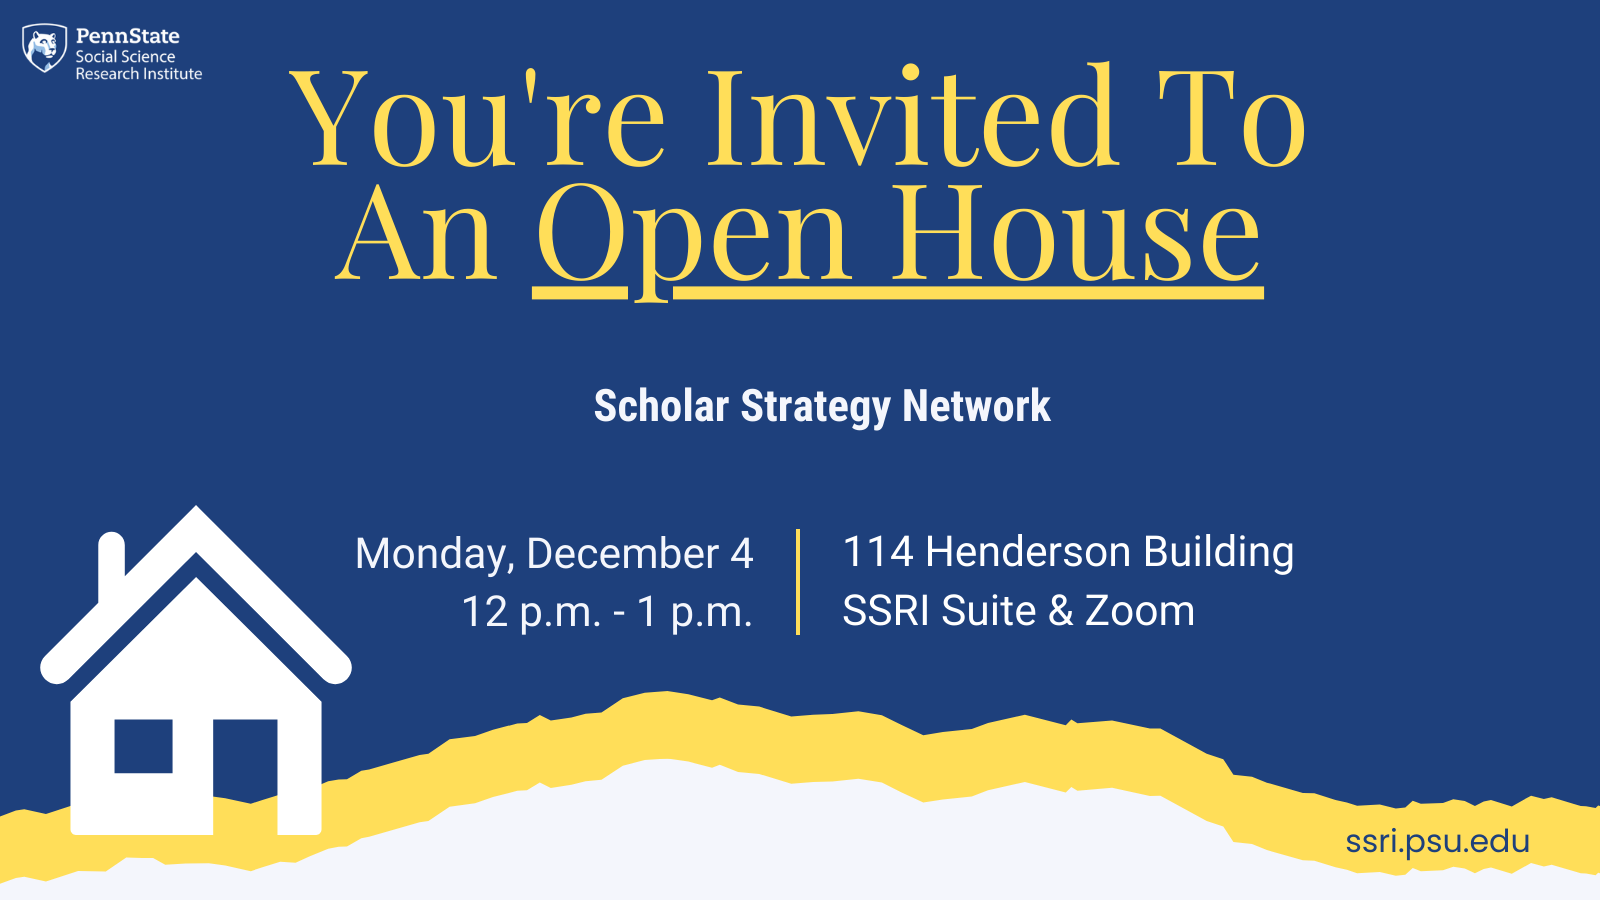 Blue graphic with a white house that says "you're invited to an open house" for the "Scholar Strategy Network" on Monday, December 4 from 12pm to 1pm in 1114 Henderson Building, SSRI Suite and Zoom.